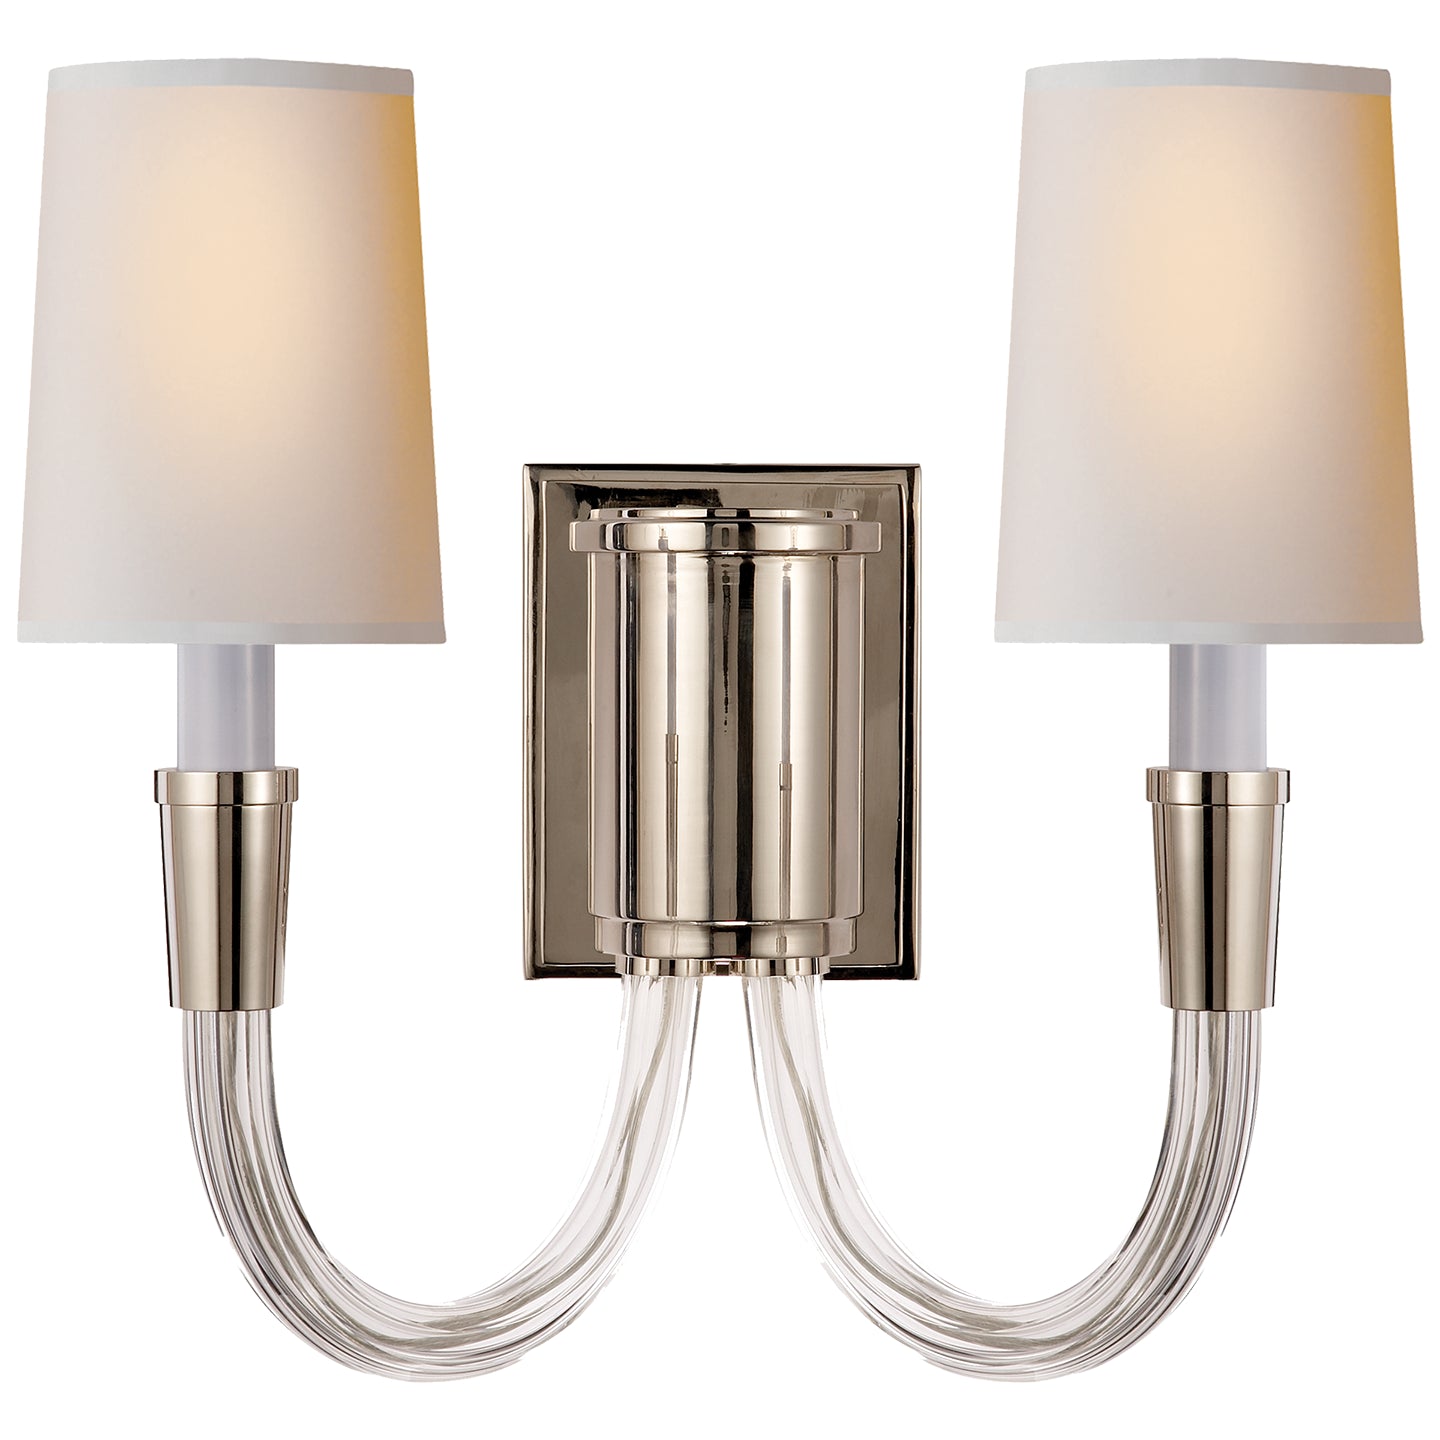 Load image into Gallery viewer, Visual Comfort Signature - TOB 2033PN-NP - Two Light Wall Sconce - Vivian - Polished Nickel
